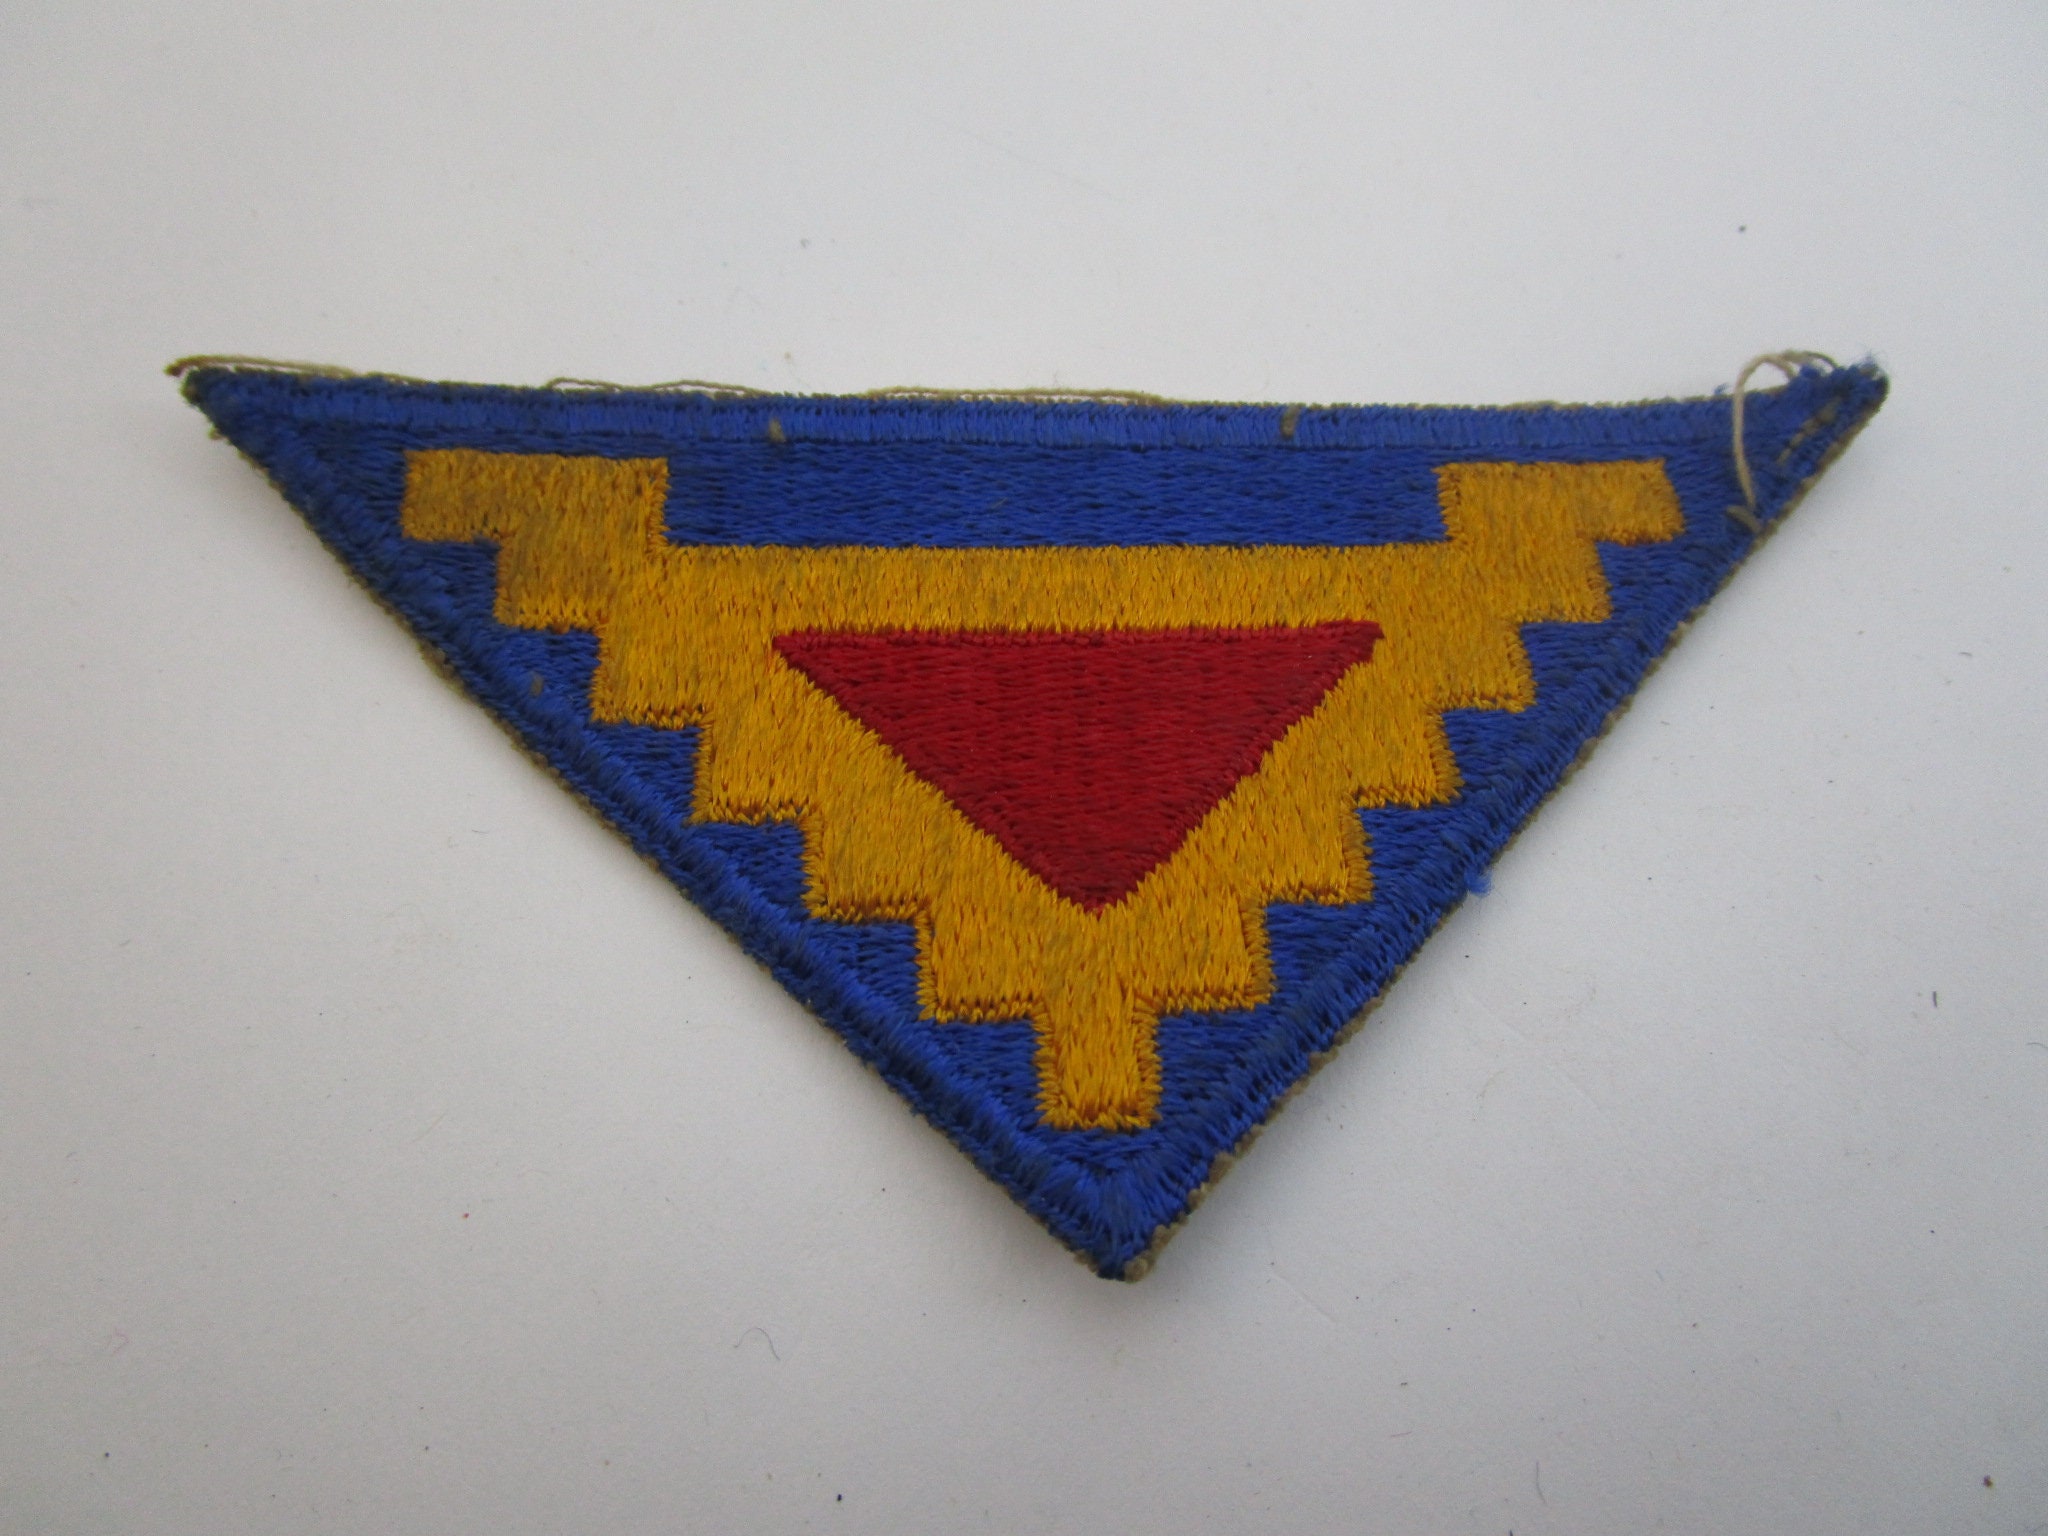 1944 WW II Article U.S. ARMY SHOULDER INSIGNIA Division, Theater Patches  031822